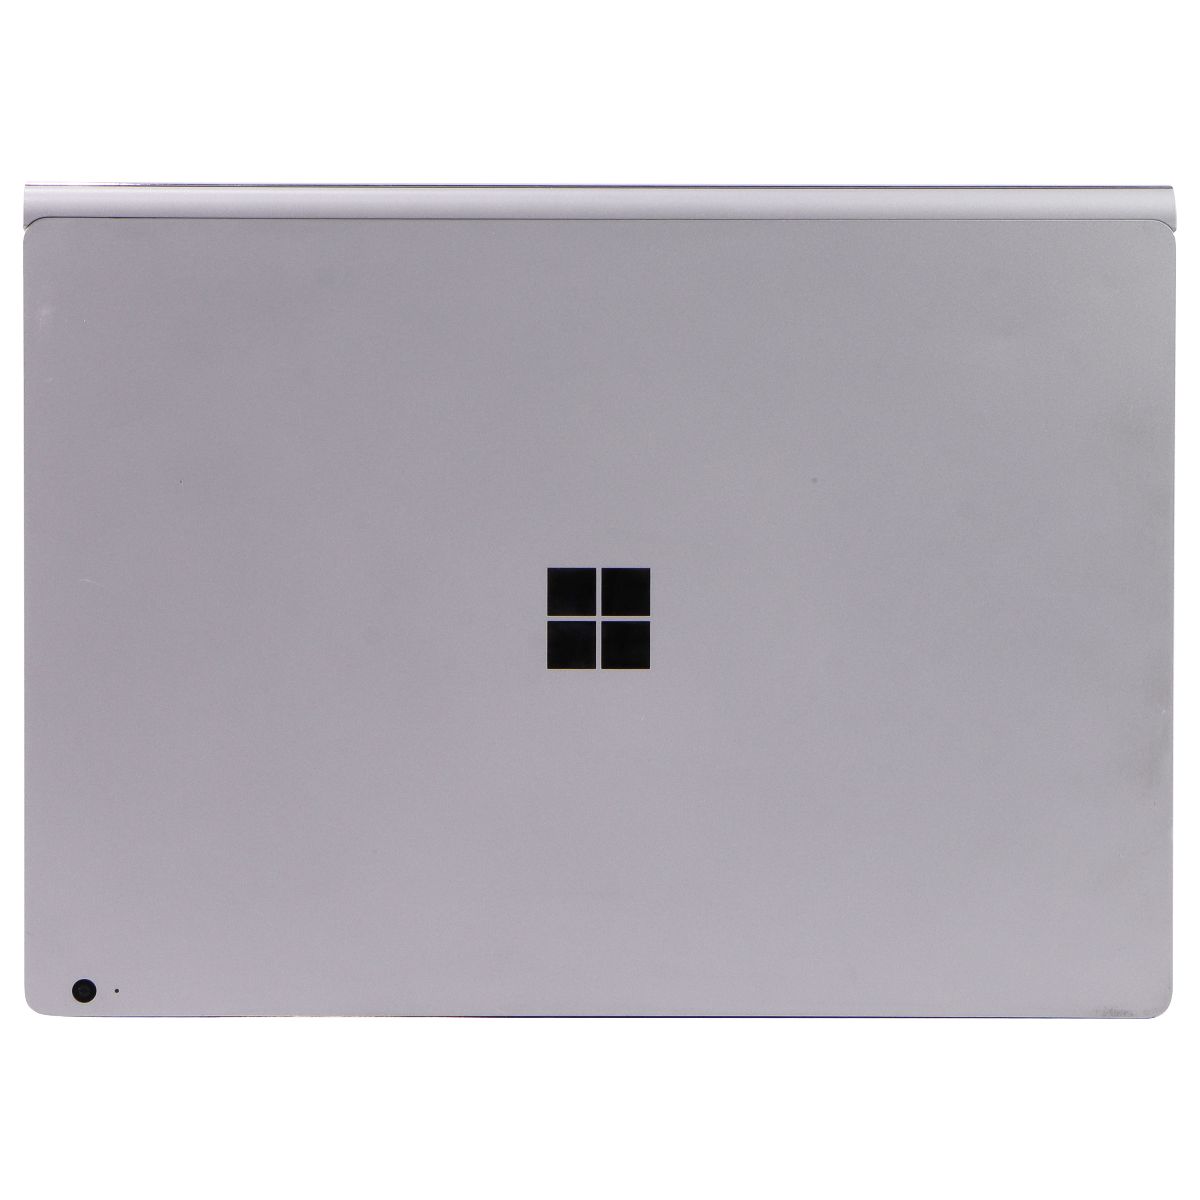 Microsoft Surface Book 3 (13.5-in) Touch Laptop i7-1065G7/256 GB/16GB/10 Pro Laptops - PC Laptops & Netbooks Microsoft    - Simple Cell Bulk Wholesale Pricing - USA Seller